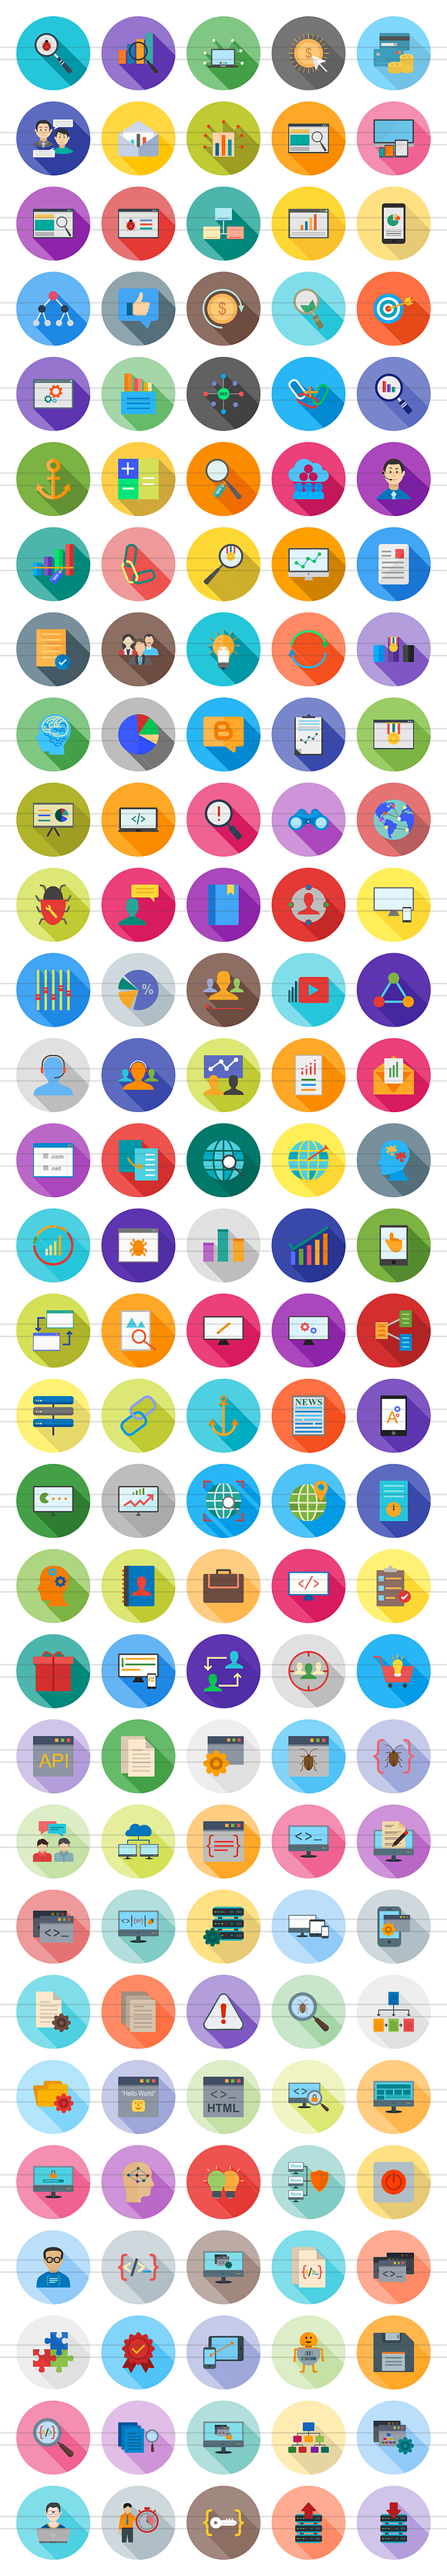 150 SEO & Development Flat Icons in Graphics - product preview 1